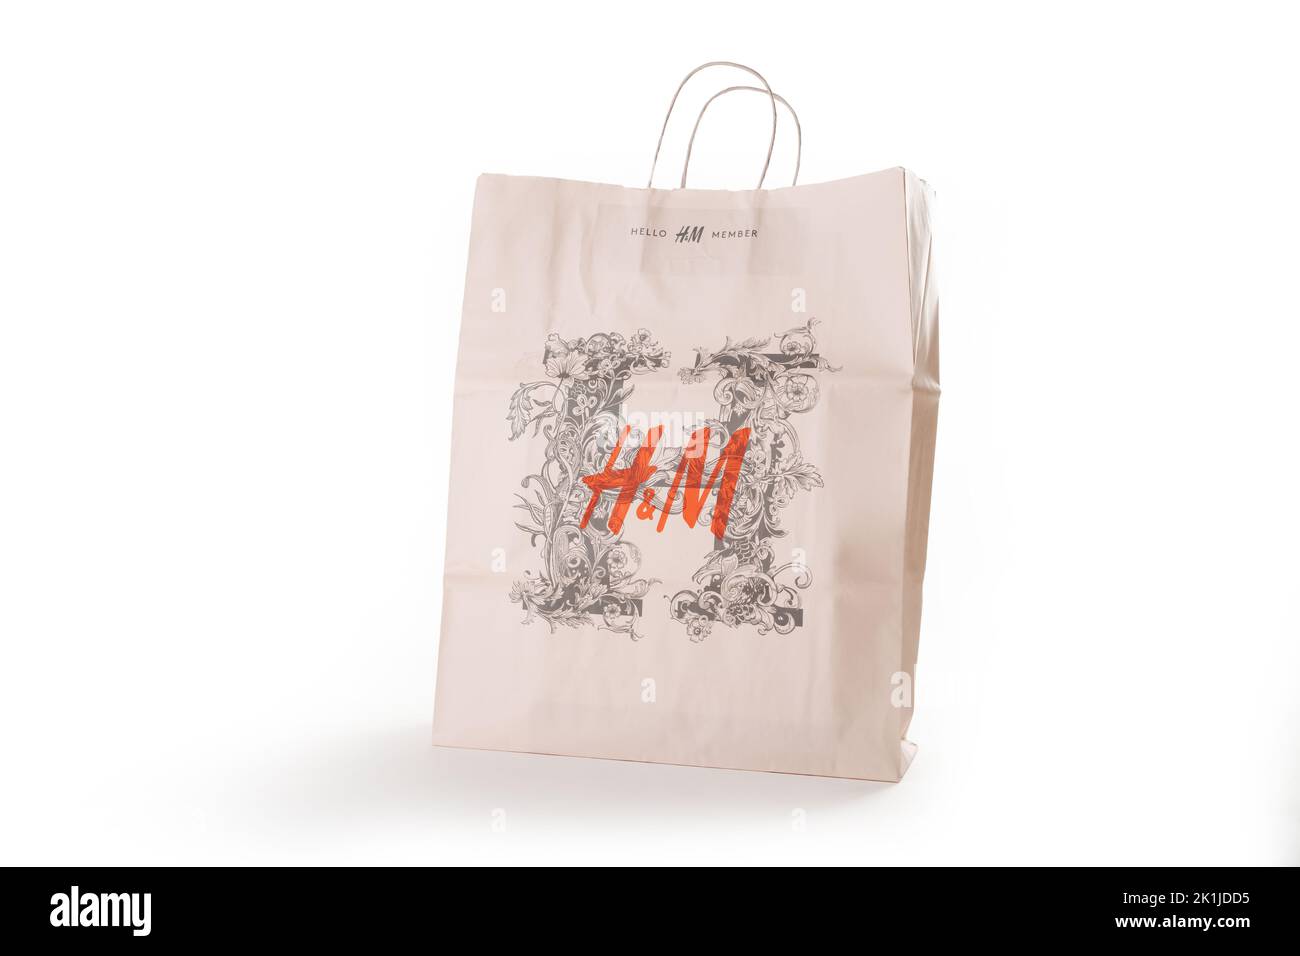 Cyprus, Paphos - SEPTEMBER 08, 2022: Patterned HM paper bag from famous swedish fast-fashion clothing brand. Over white background. Stock Photo